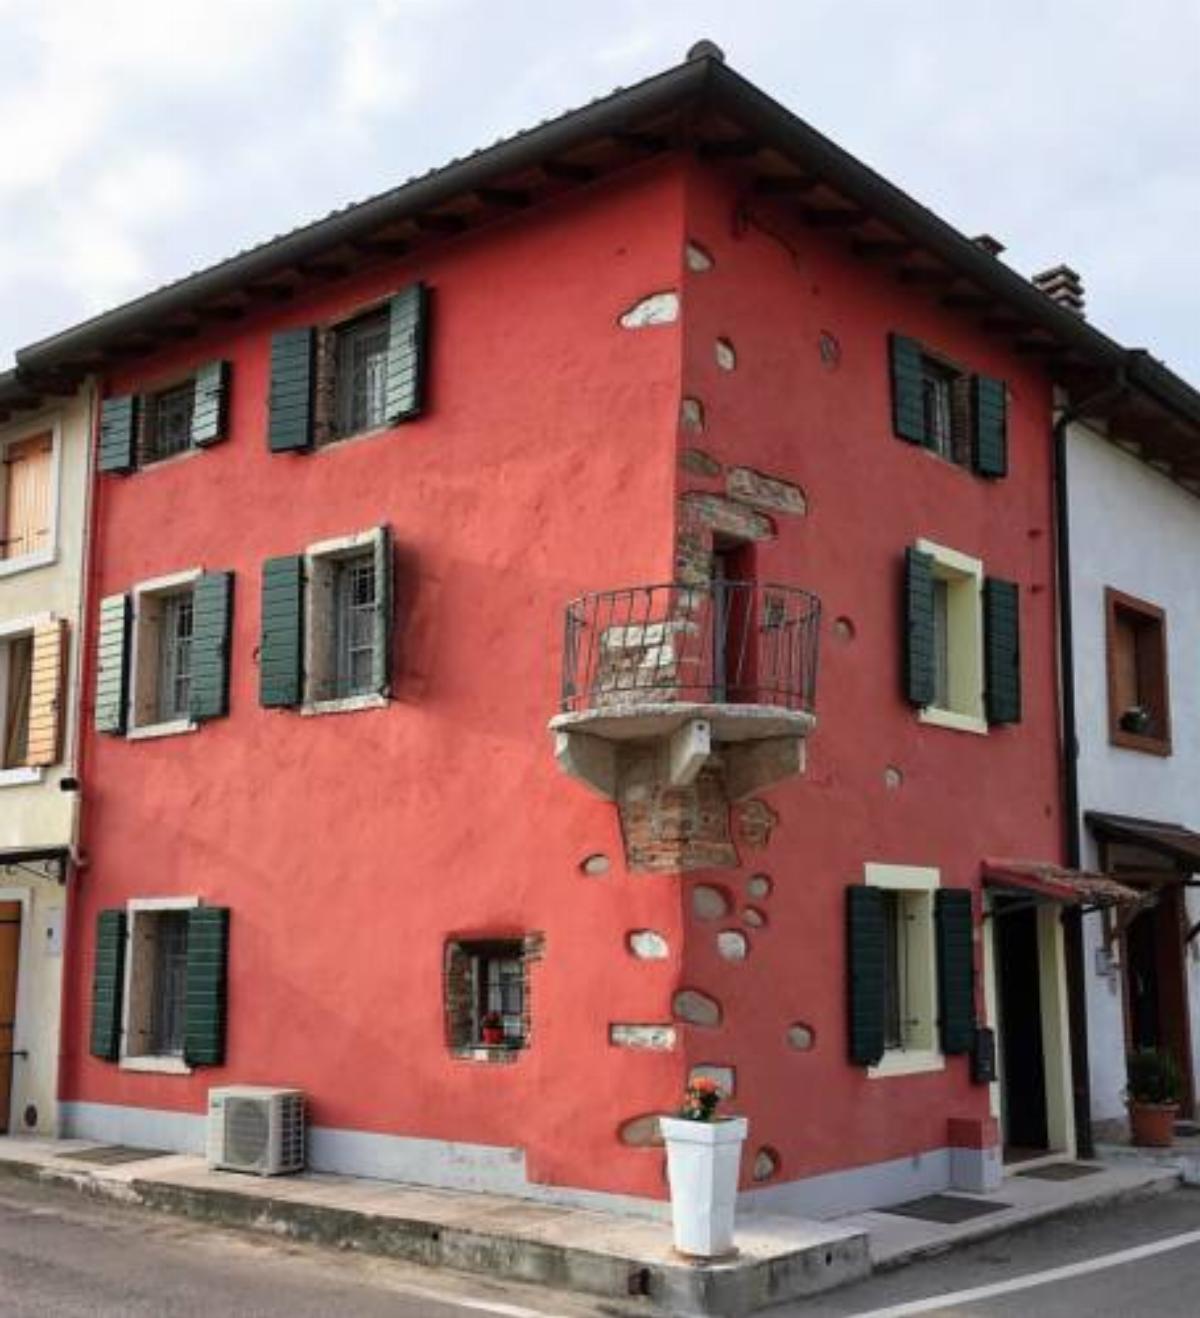 Redhouse Hotel Bussolengo Italy